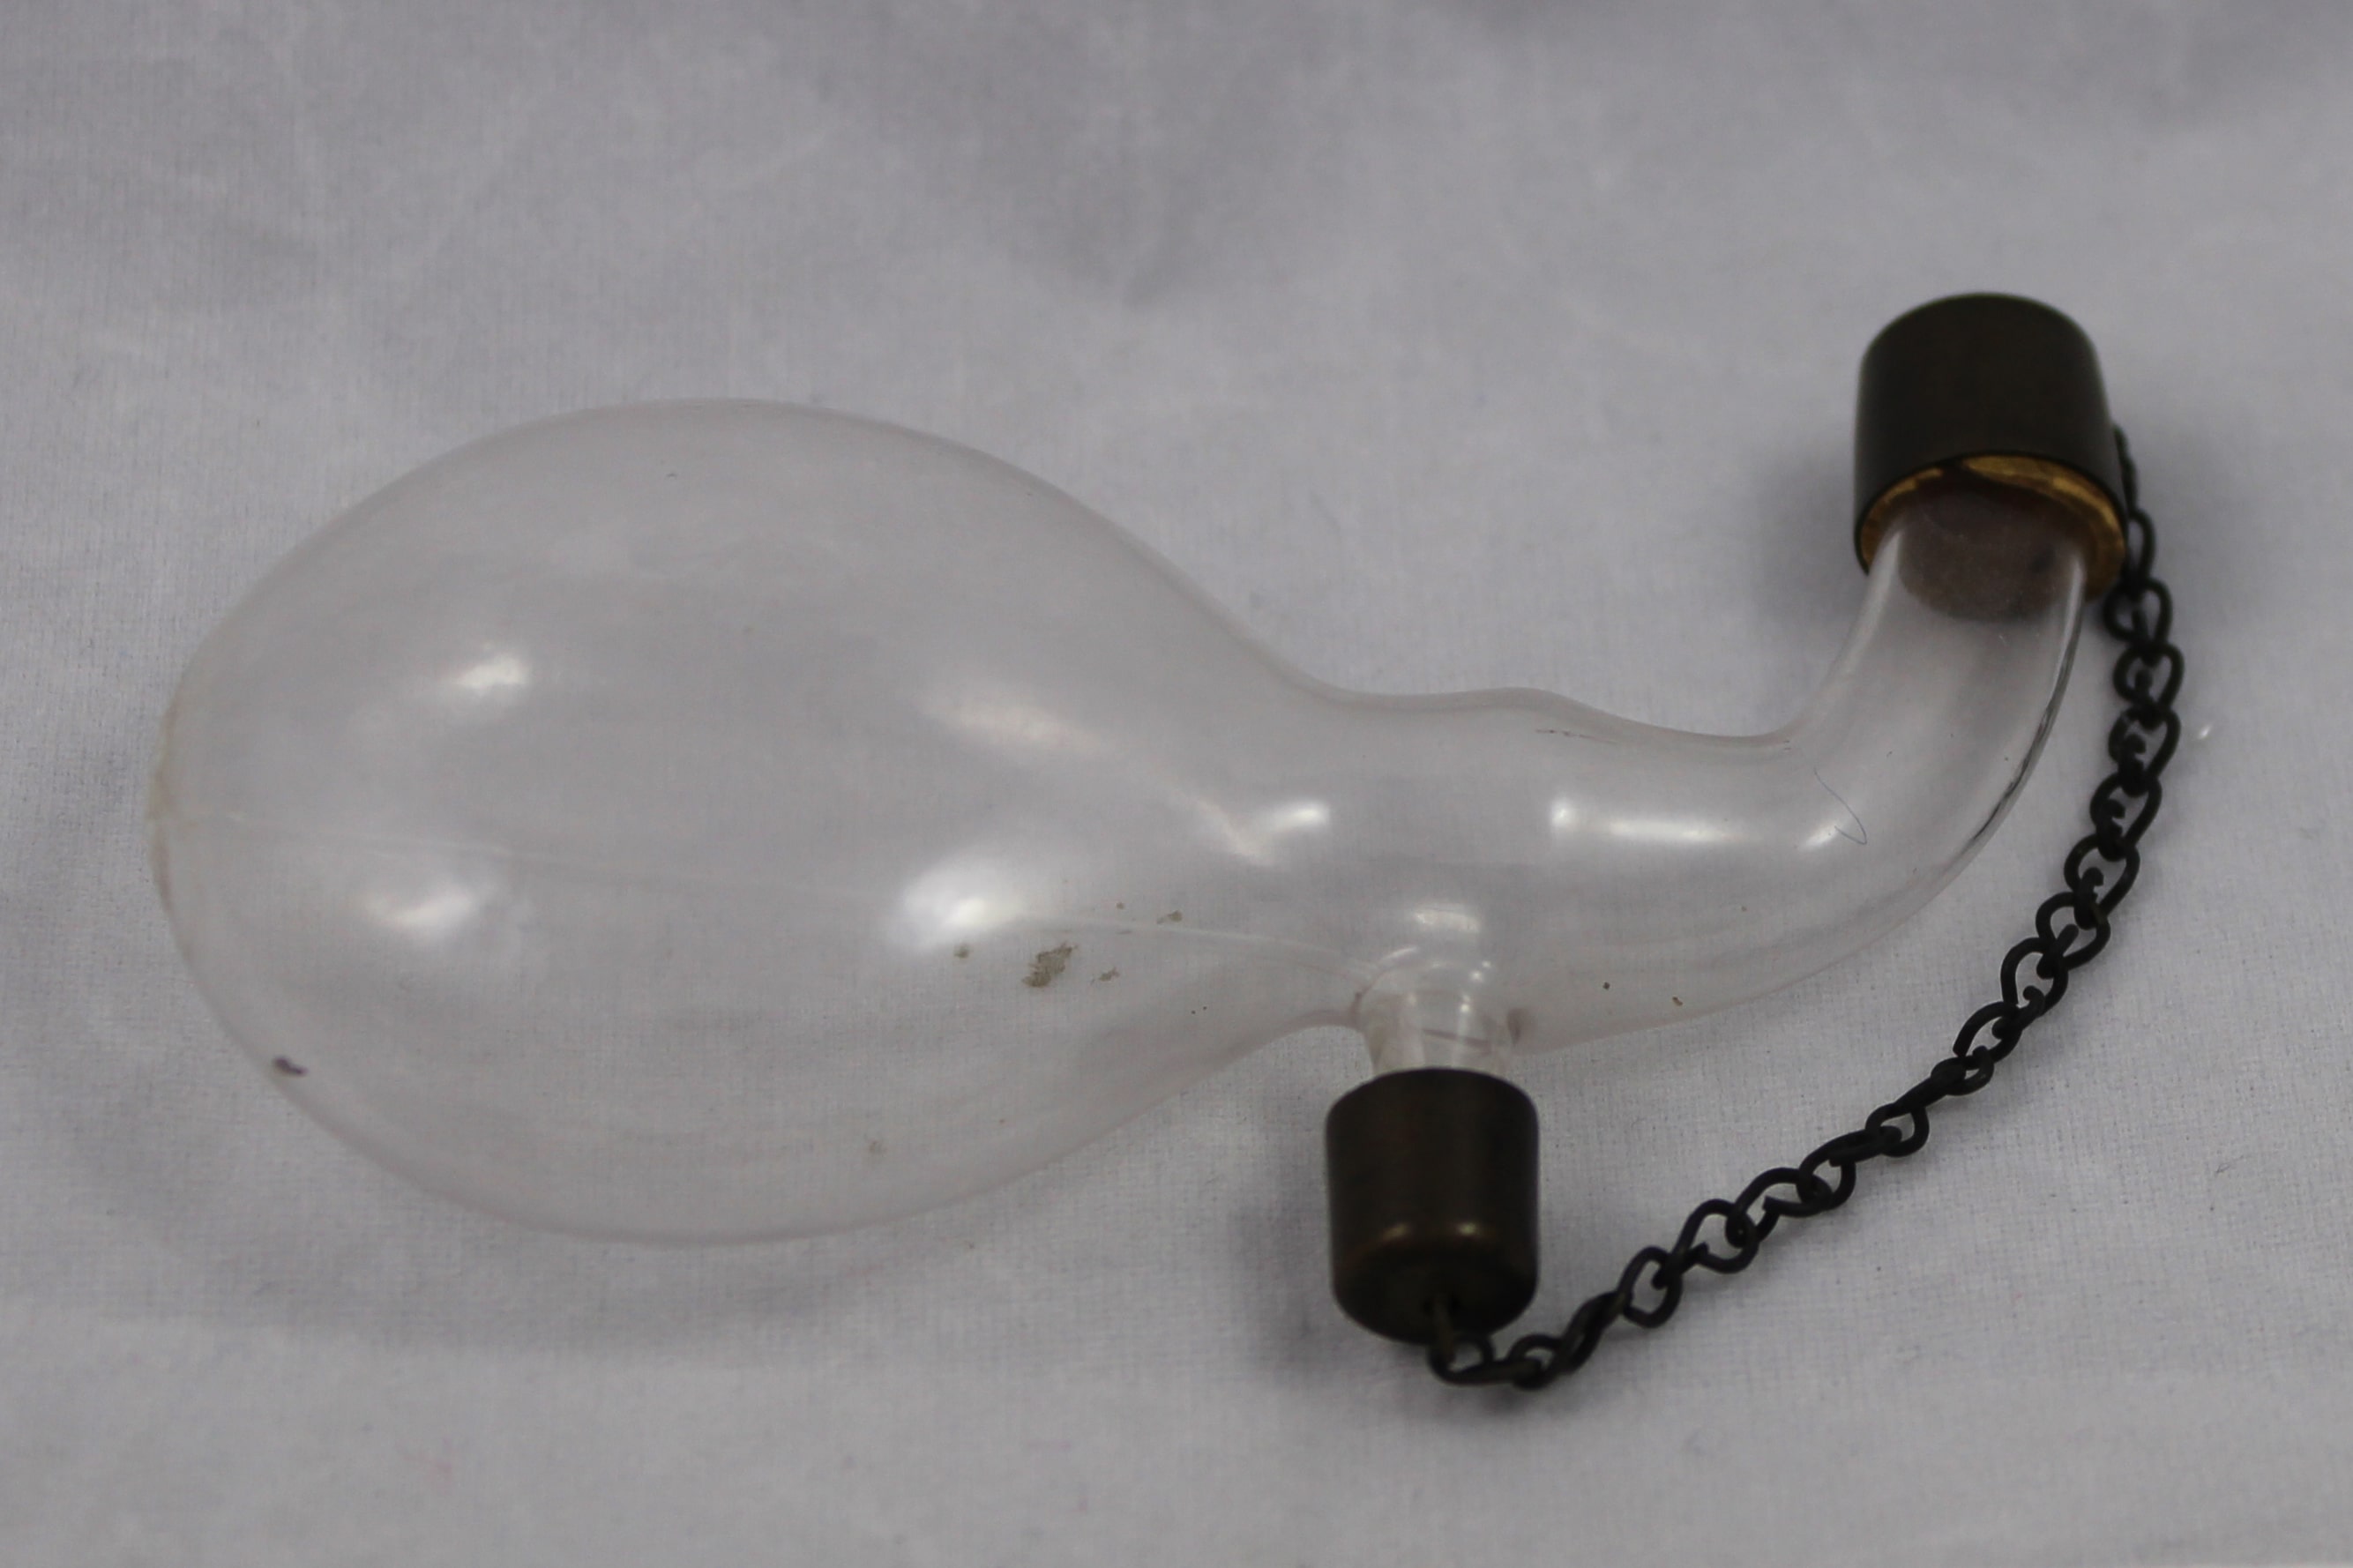 Circular glass flask with two necks, metal gap on each neck, caps connected by a small chain